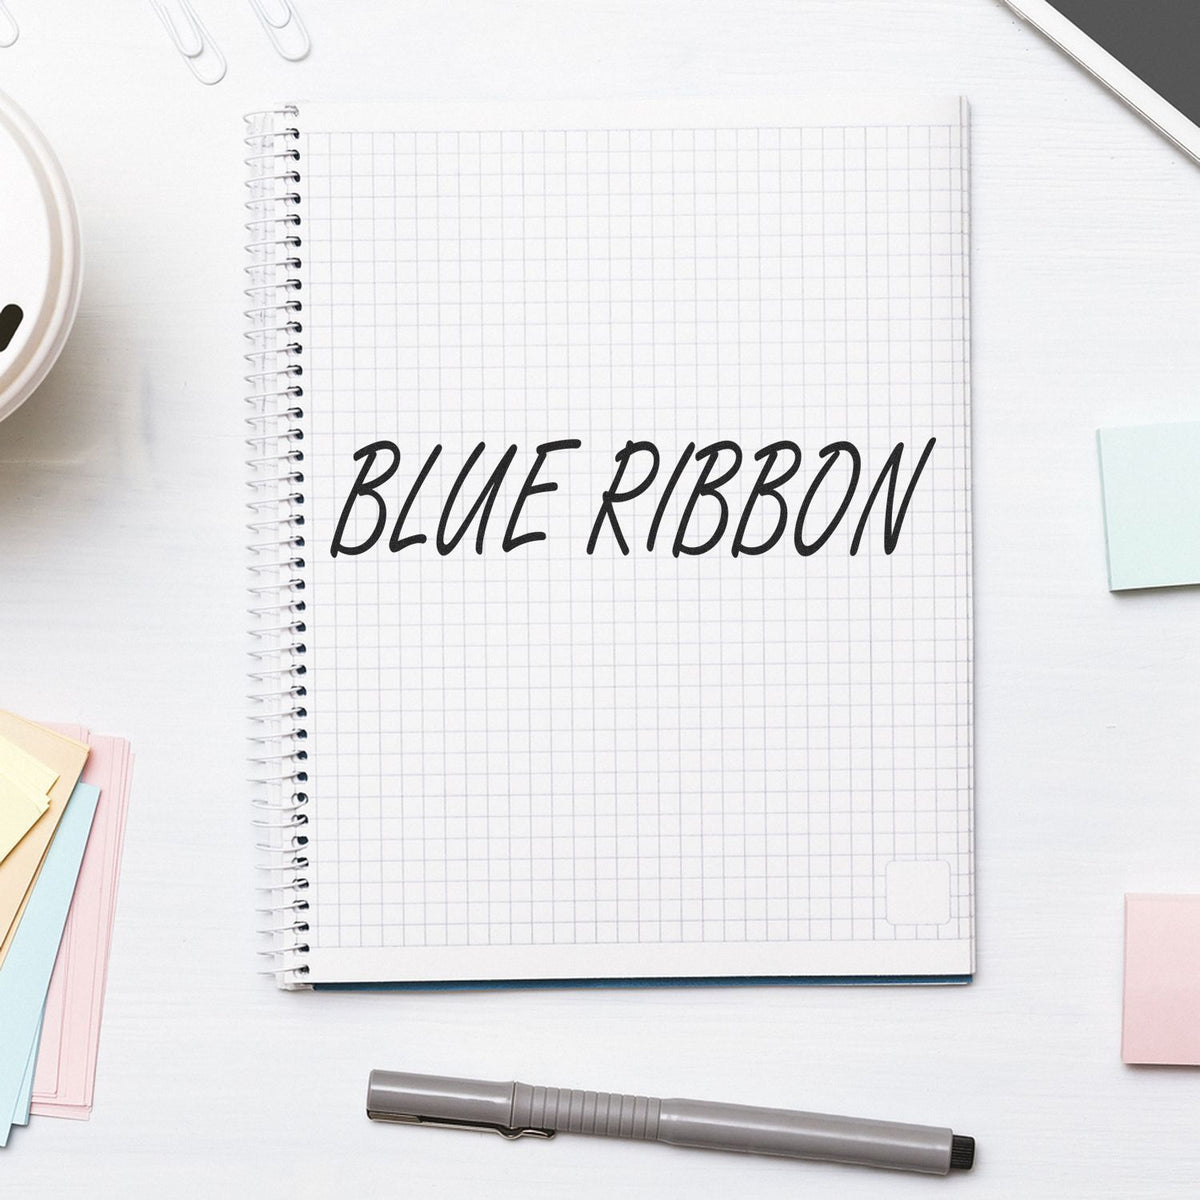 Blue Ribbon Rubber Stamp Lifestyle Photo